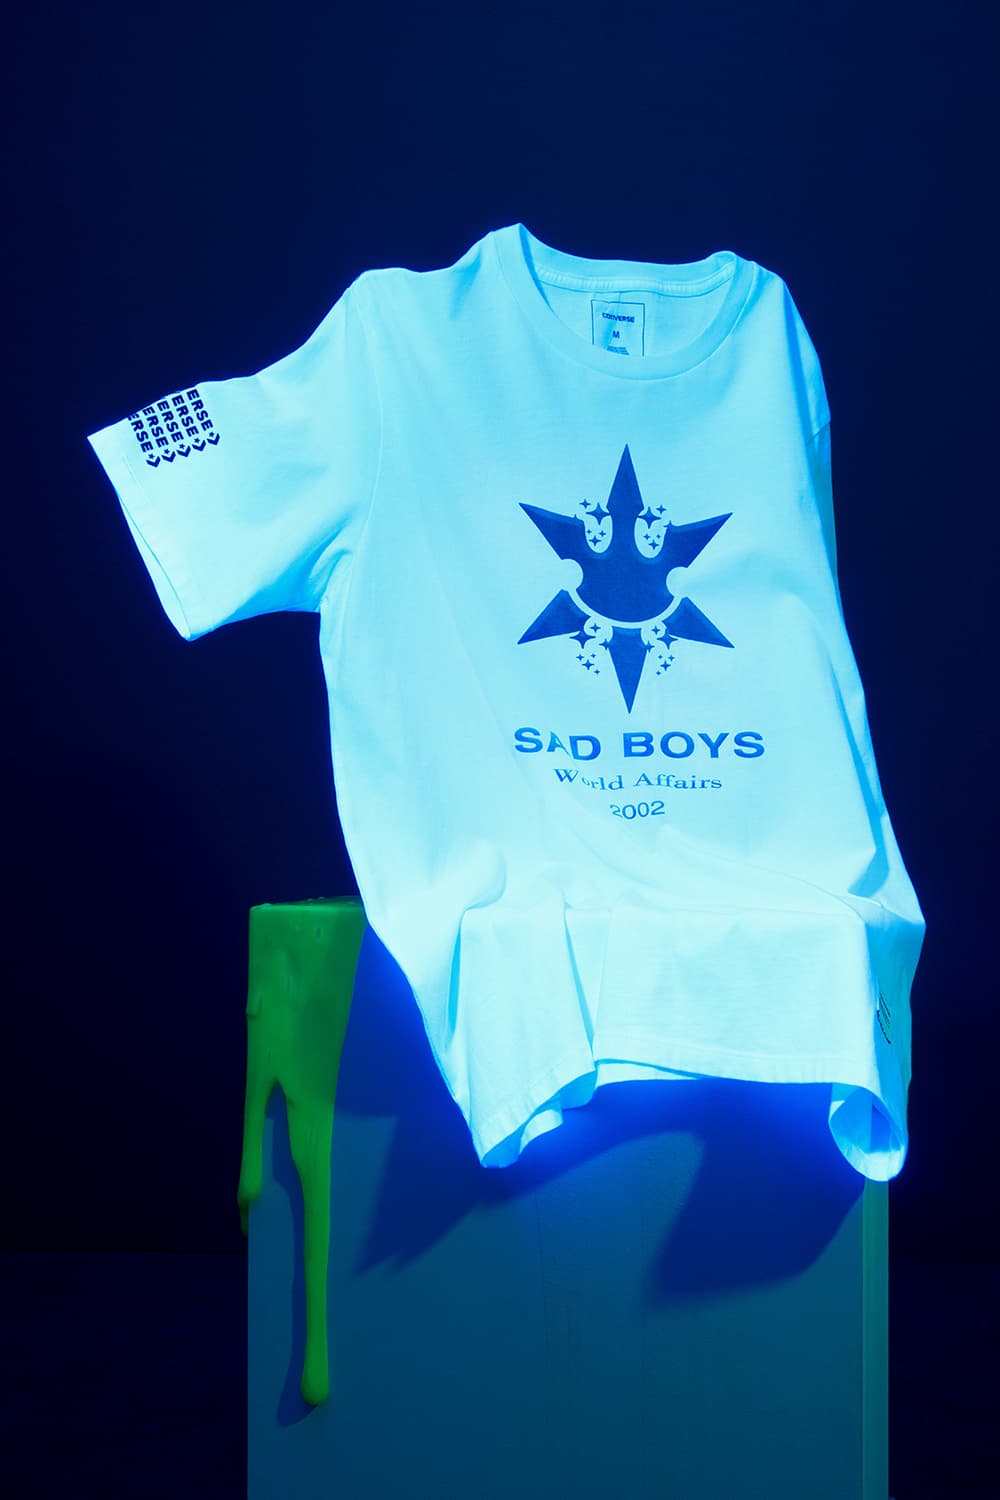 Yung Lean Sadboys Gear Converse One Star Toxic Bladee Apparel Release Information Details Closer Official Look General